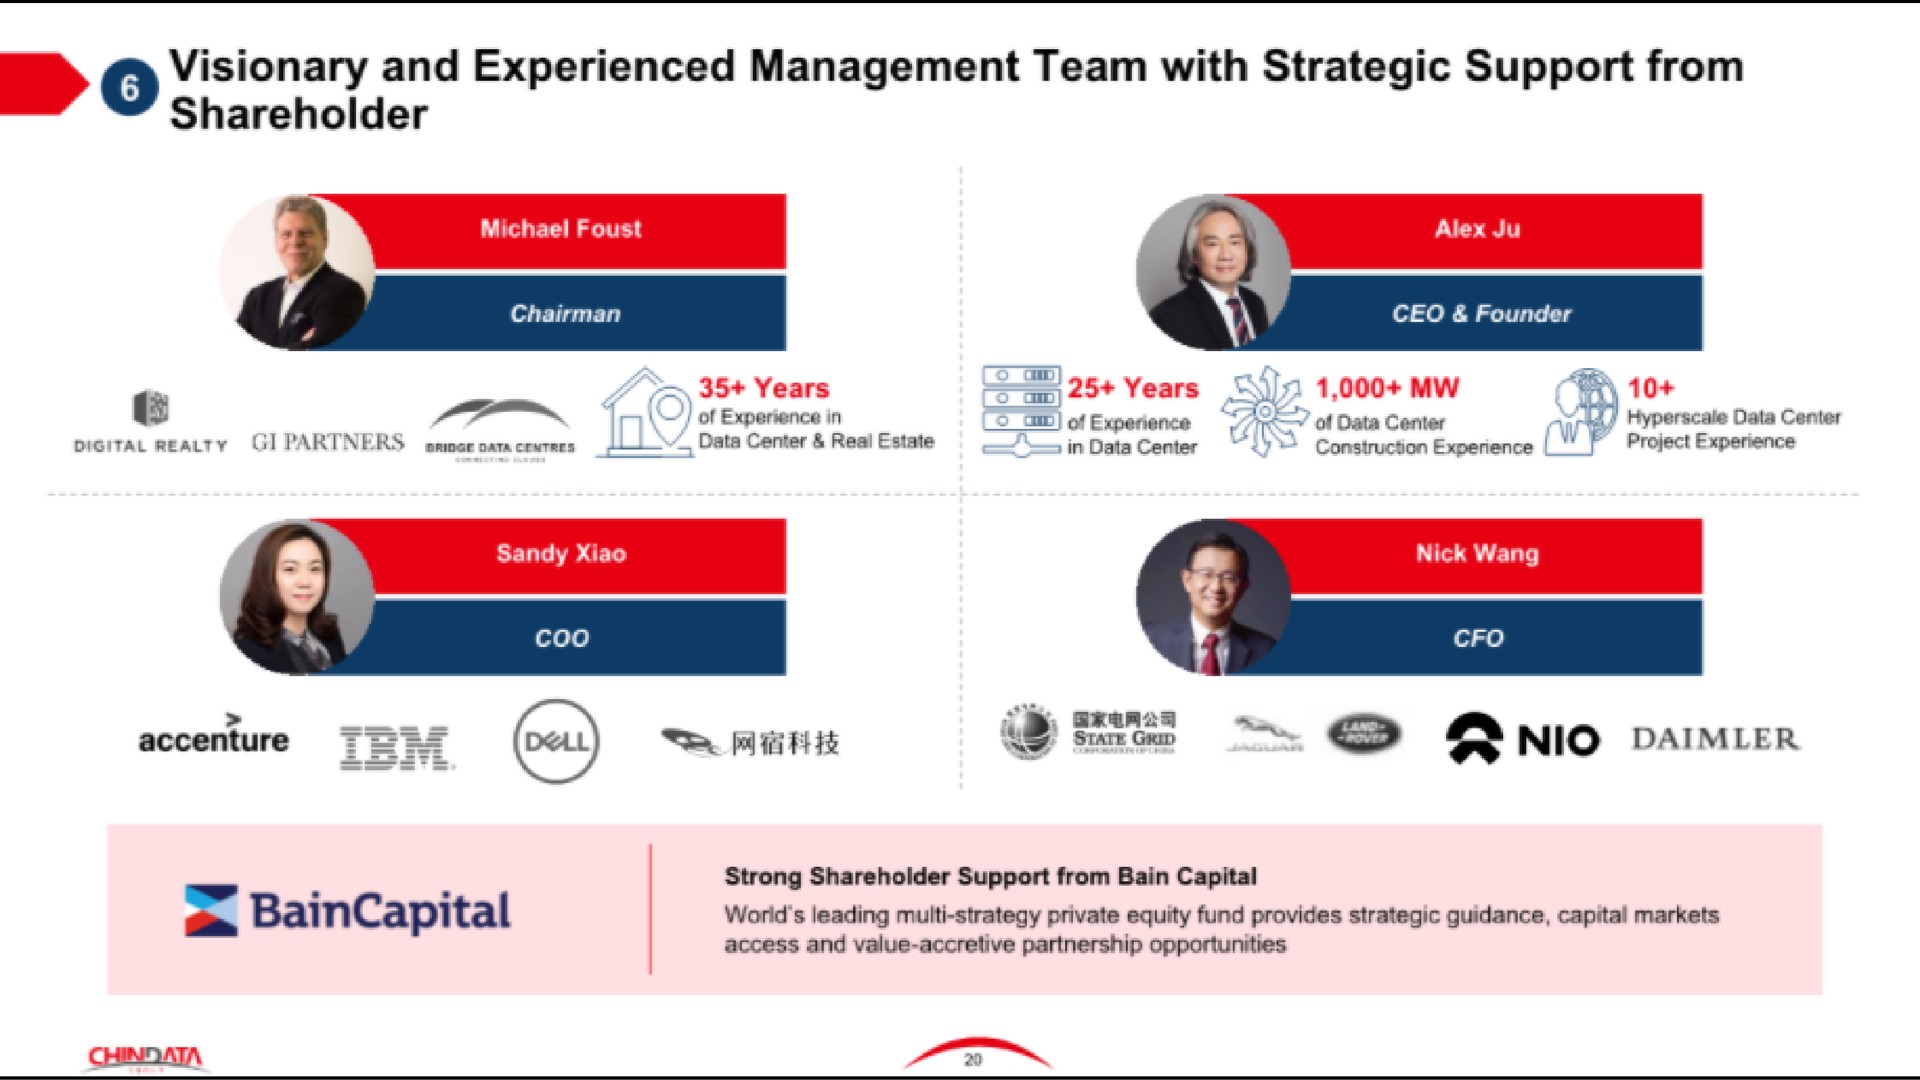 visionary and experienced management team with strategic support from shareholder i or years years pry mat | Chindata Group